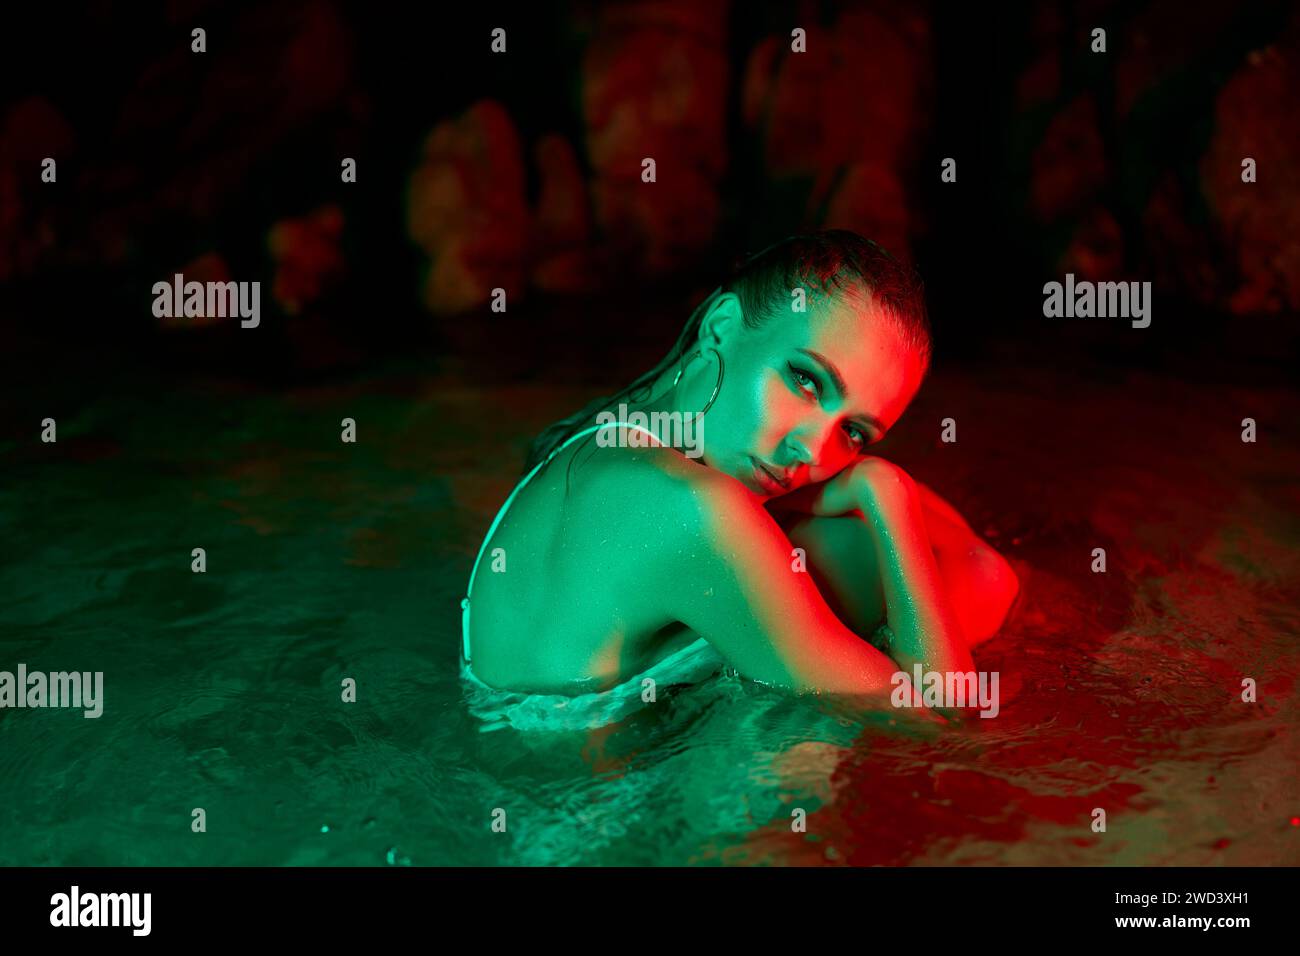 Woman immersed in water under red and green lights, night time, emotion expression, potential metaphor for struggle with depression or psychological Stock Photo